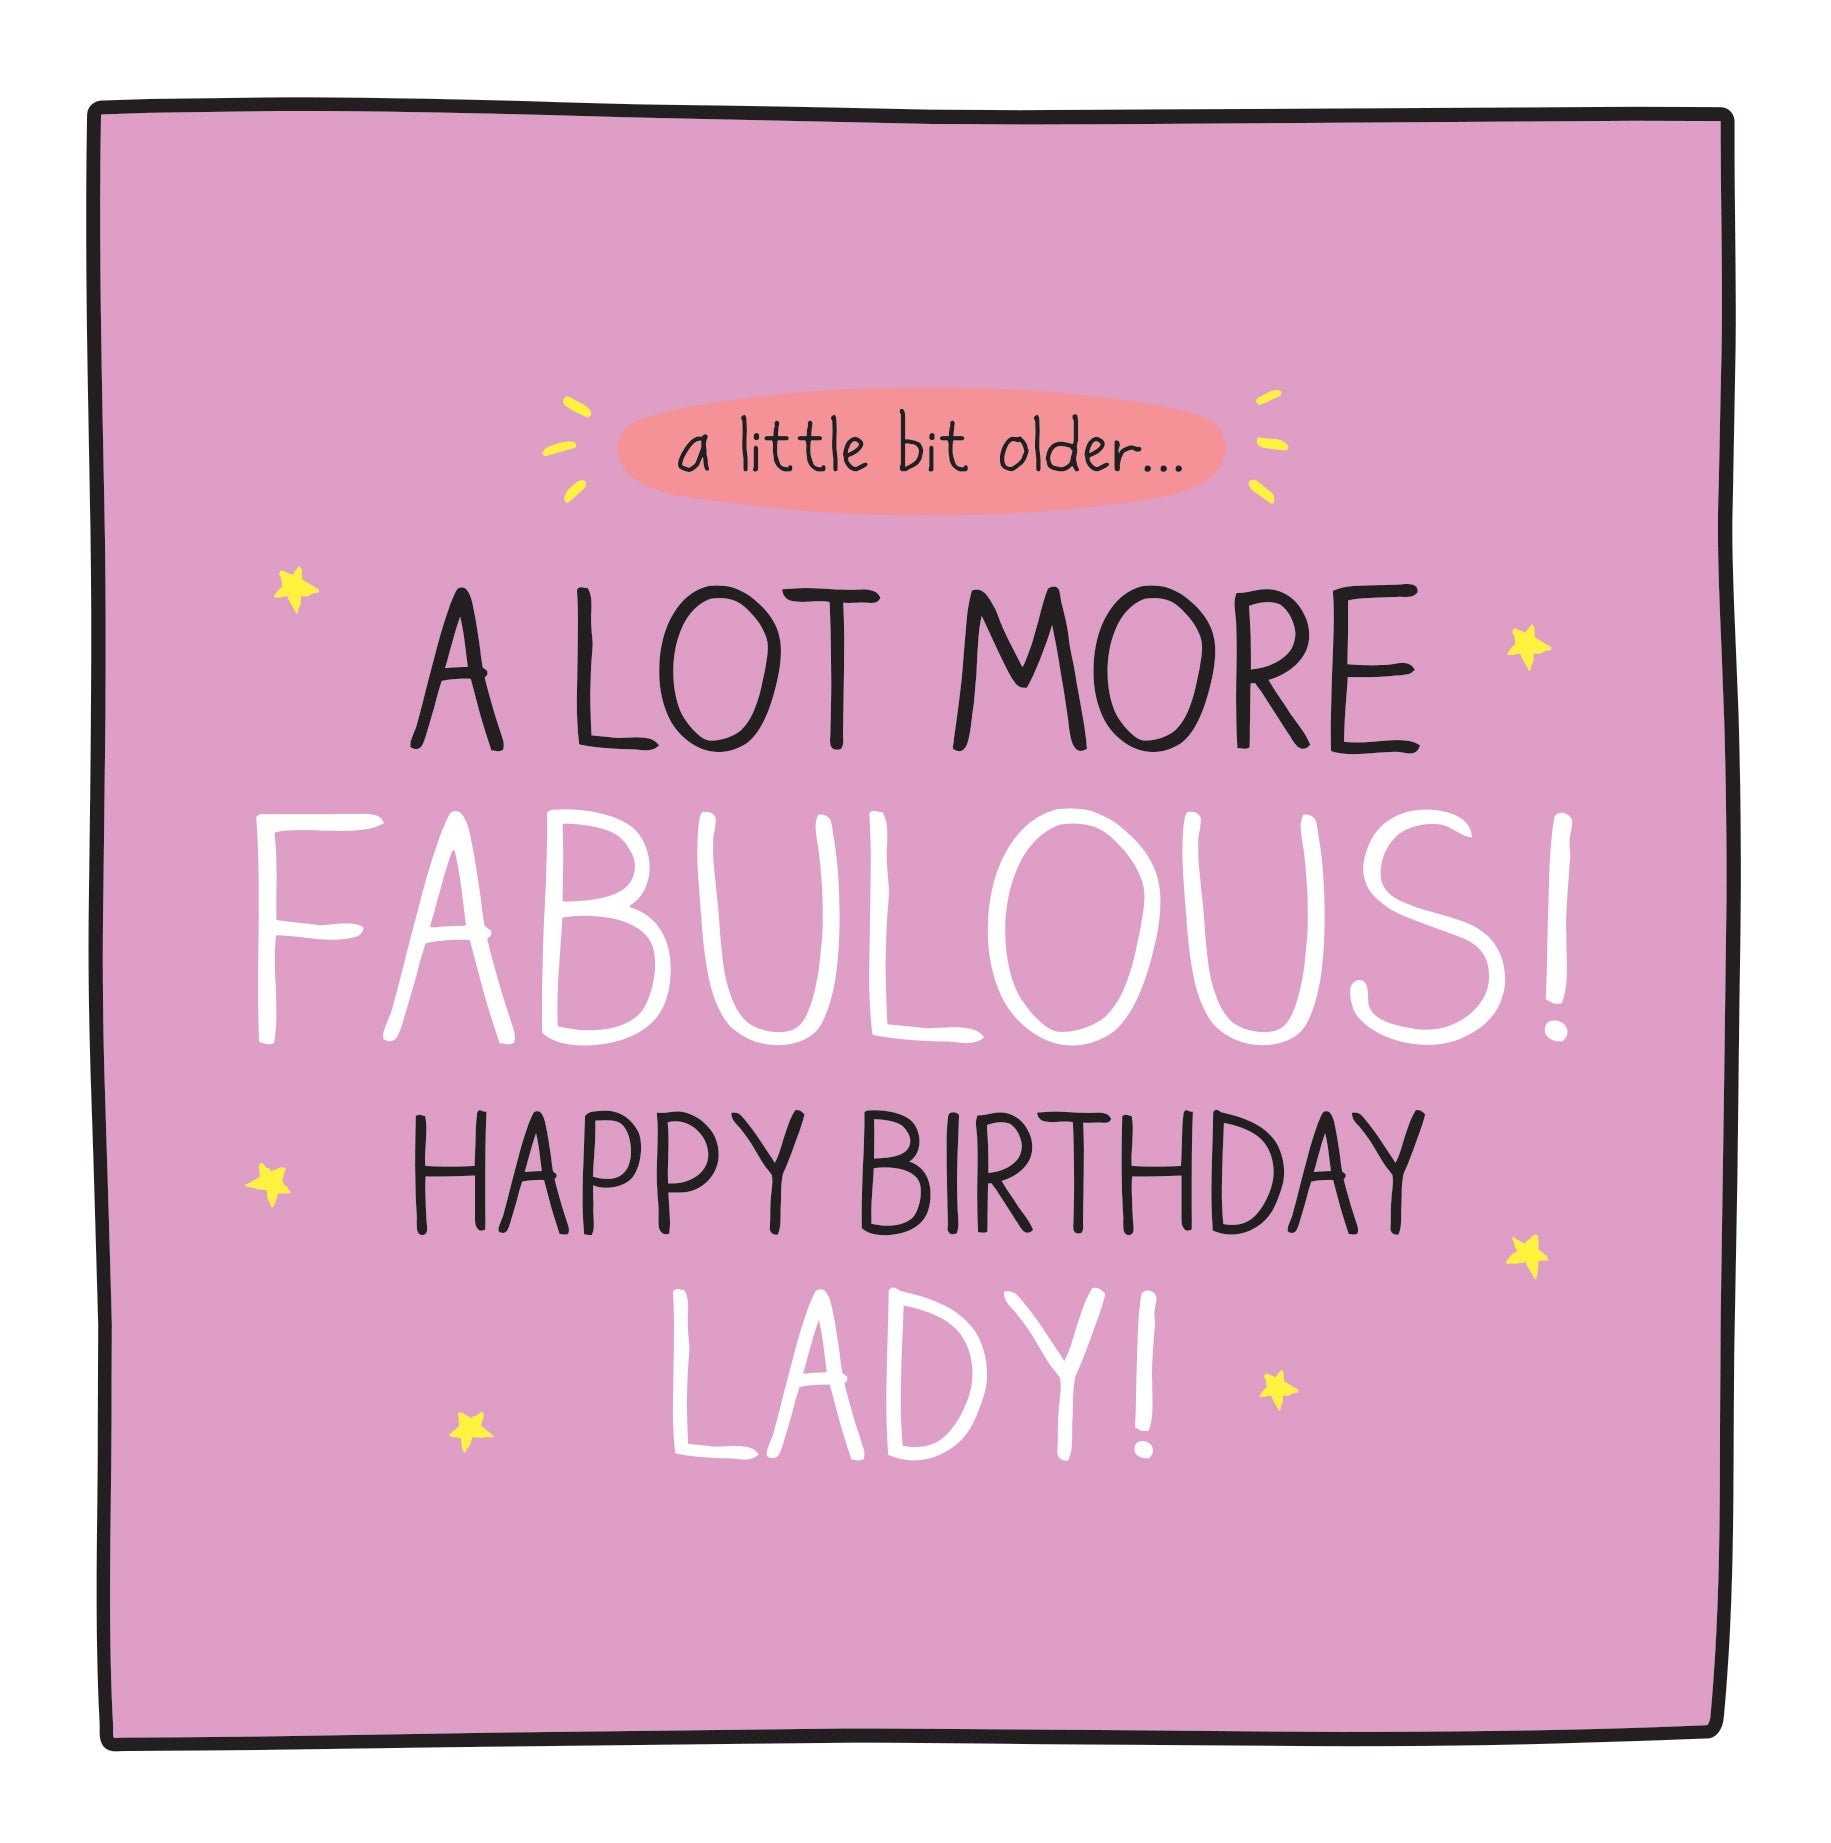 A Lot More Fabulous Birthday Card from Penny Black